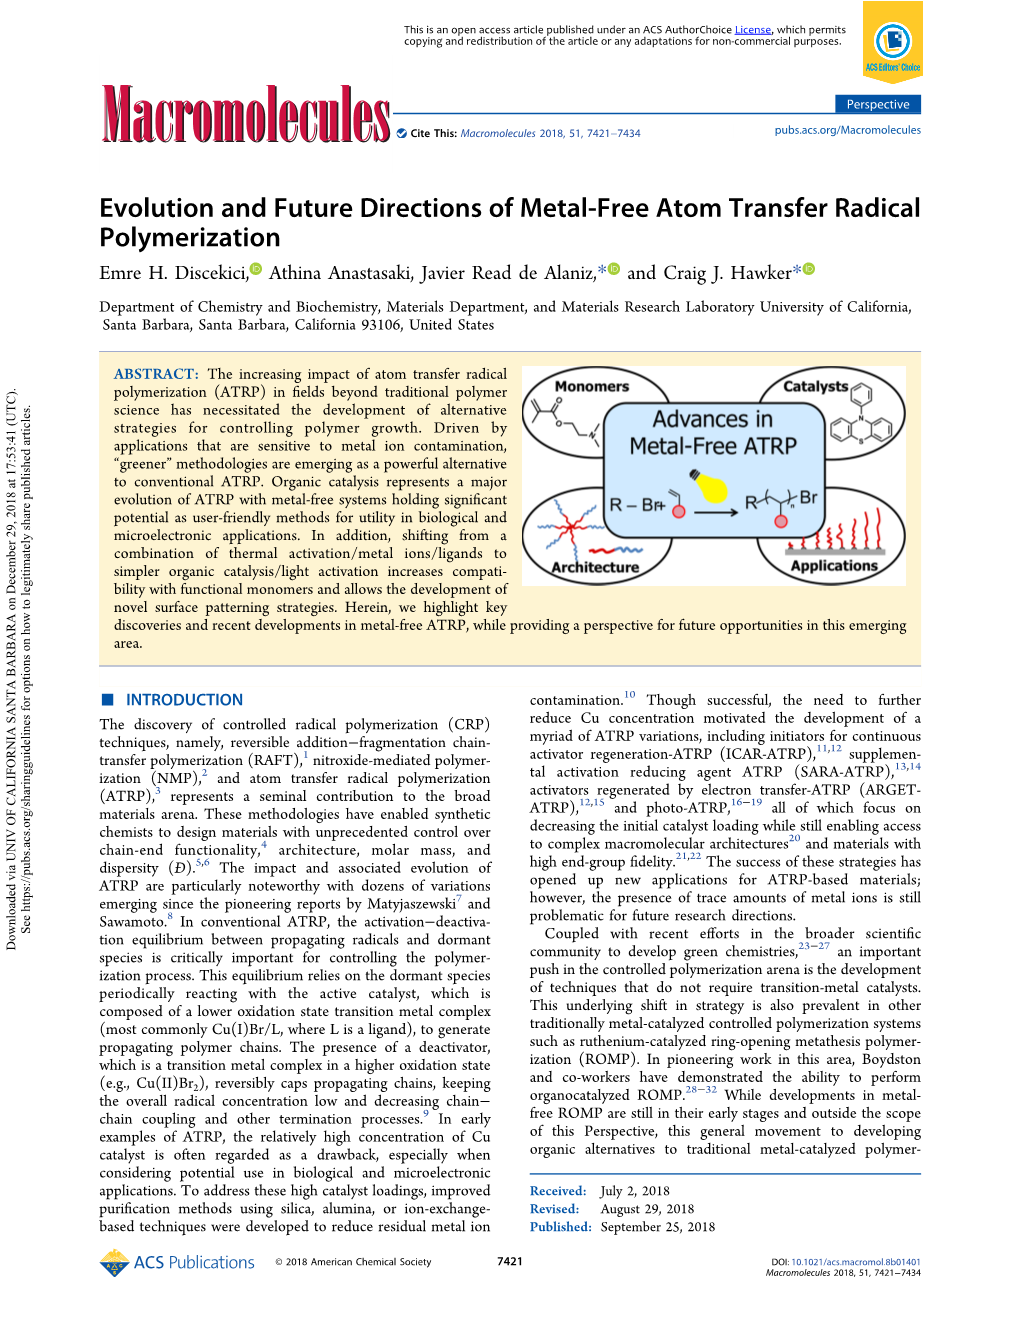 Evolution and Future Directions of Metal-Free Atom Transfer Radical Polymerization Emre H